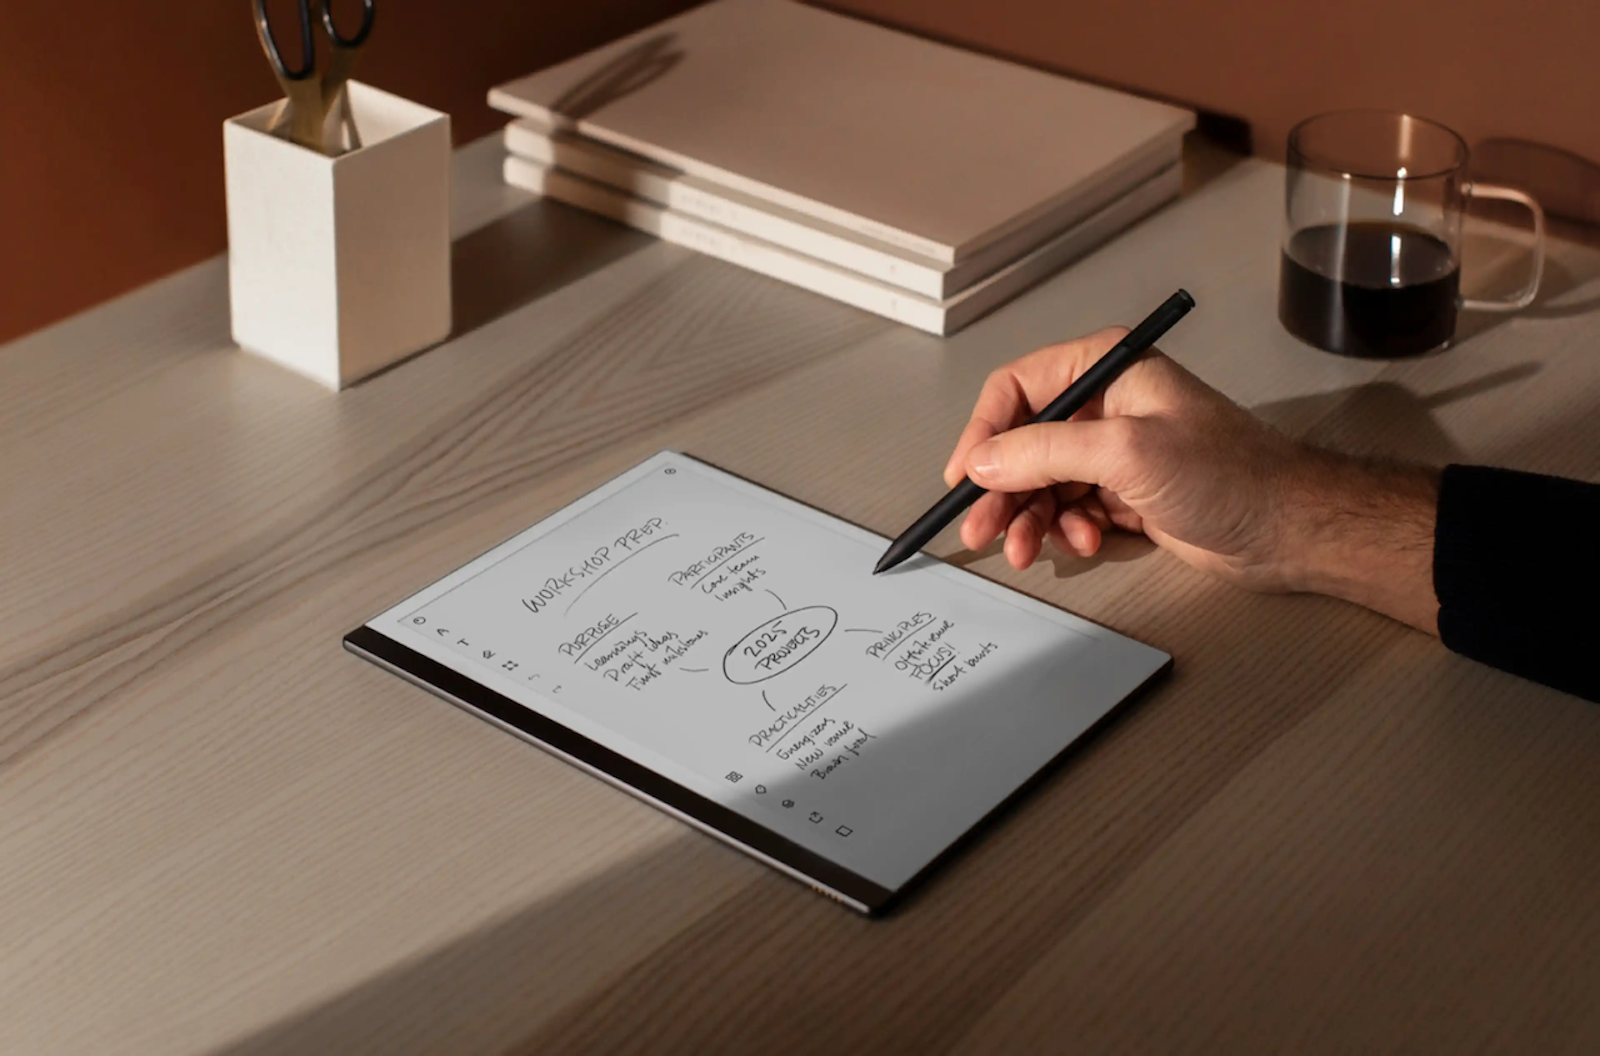 Remarkable Paper Note Tablet on a Table